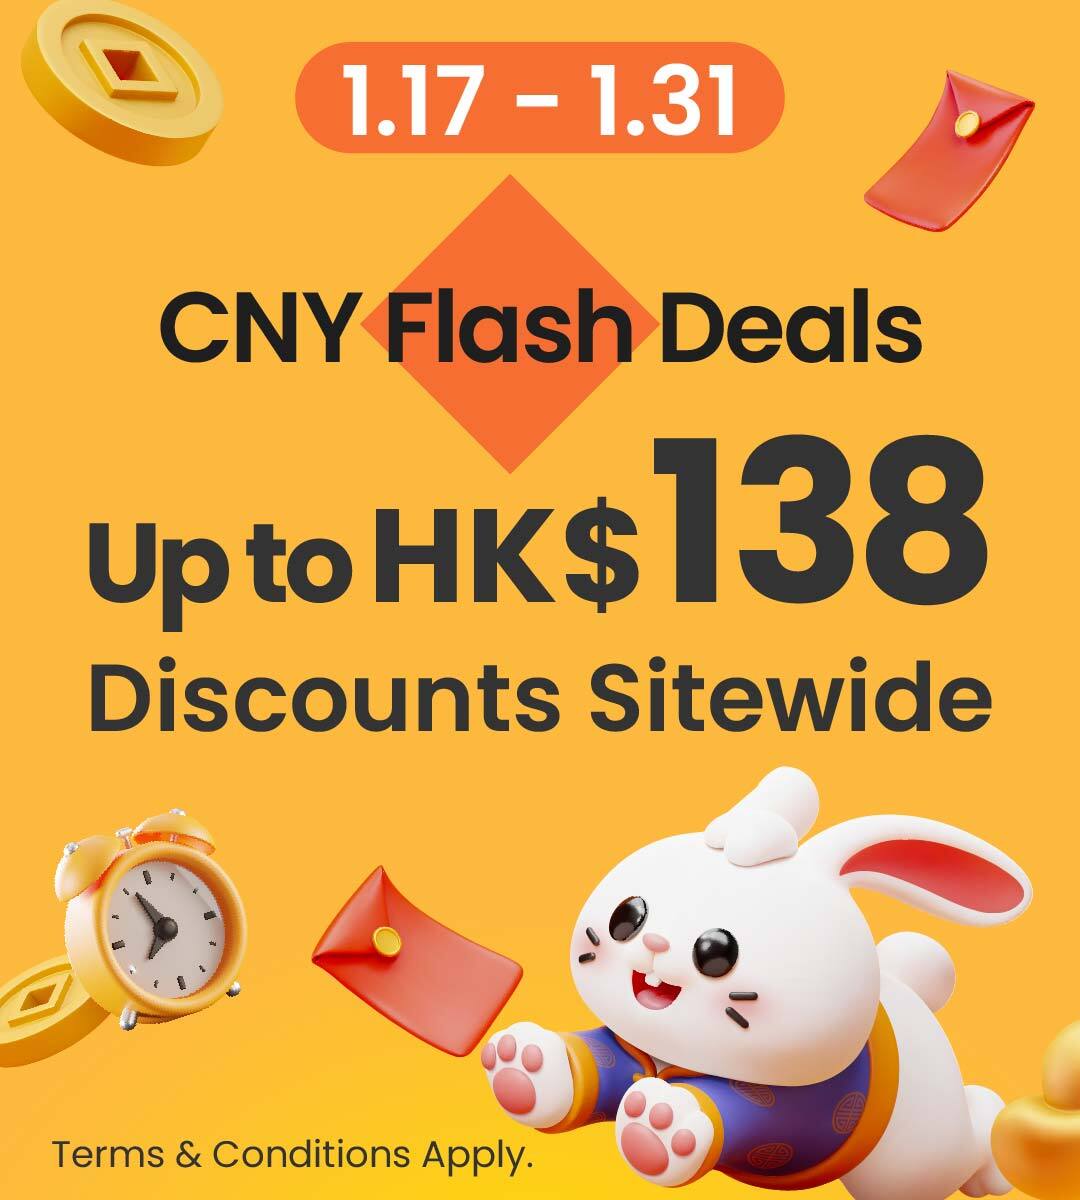 Get up to HK$138 Discounts Sitewide this CNY!